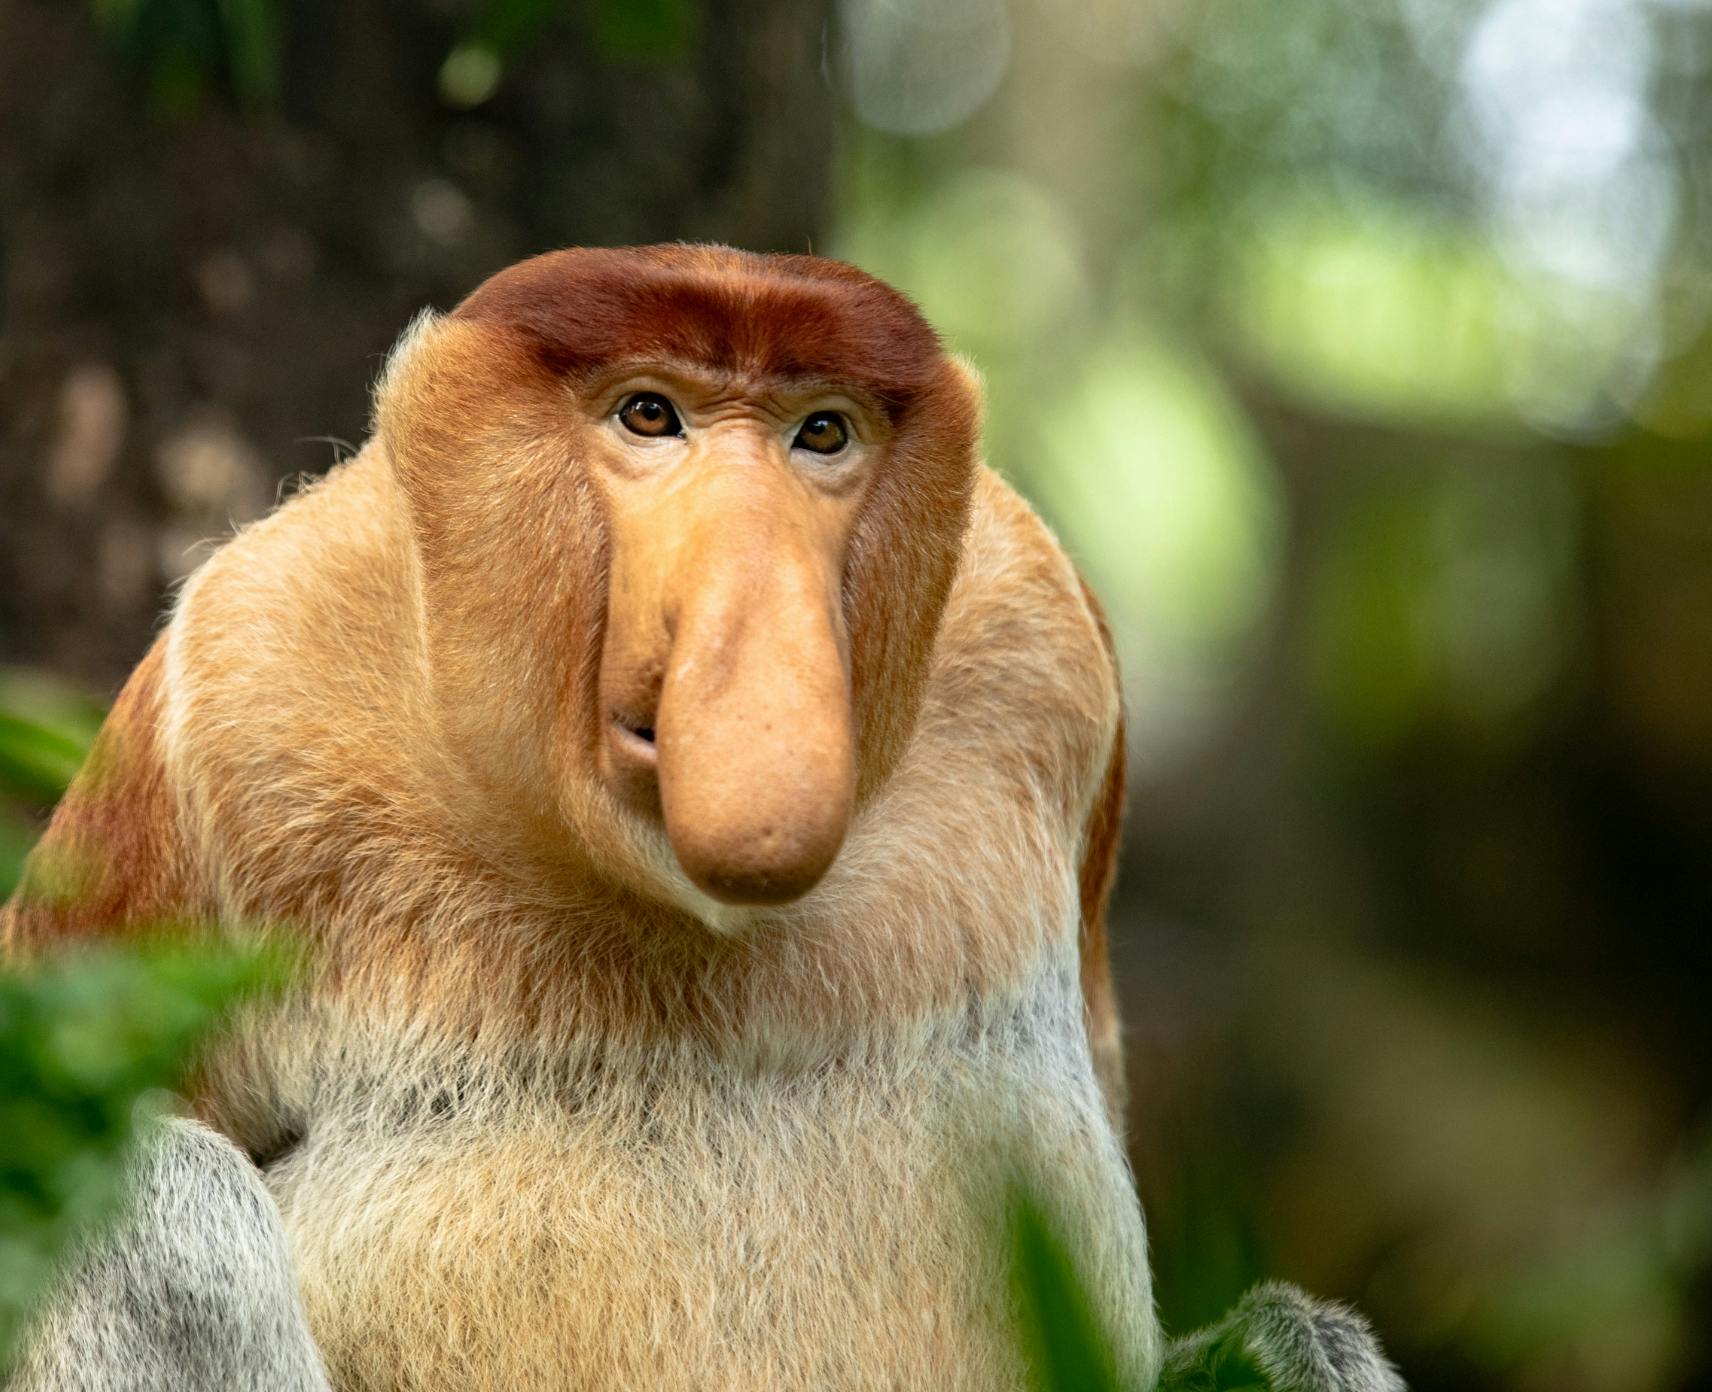 A male proboscis monkey in the wild, famously known for their long, large and droopy noses.